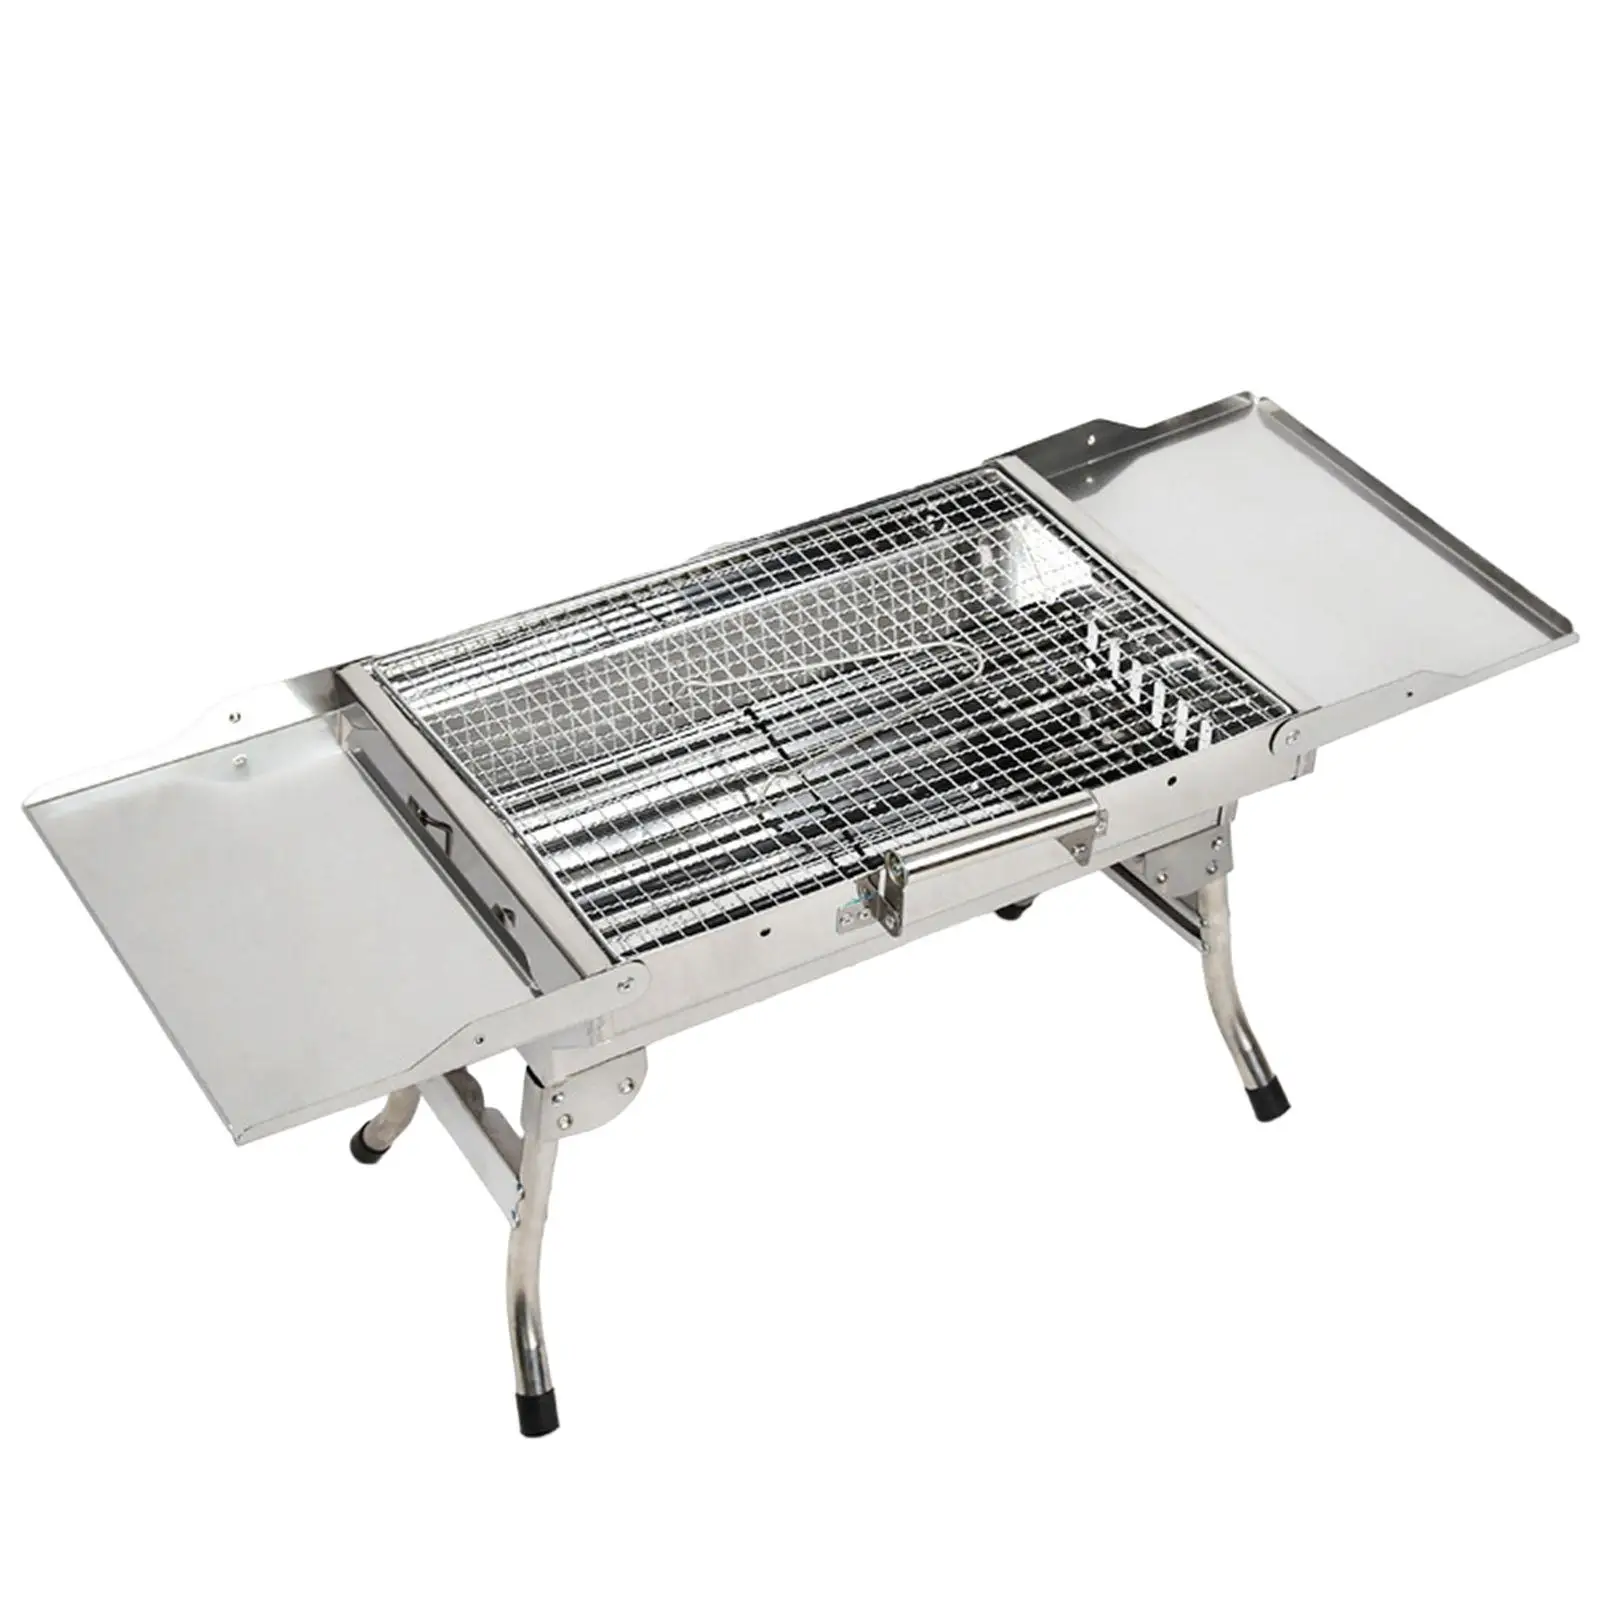 Portable Barbecue  Grill Compact Desk Tabletop Stainless Steel BBQ   Grill Tool